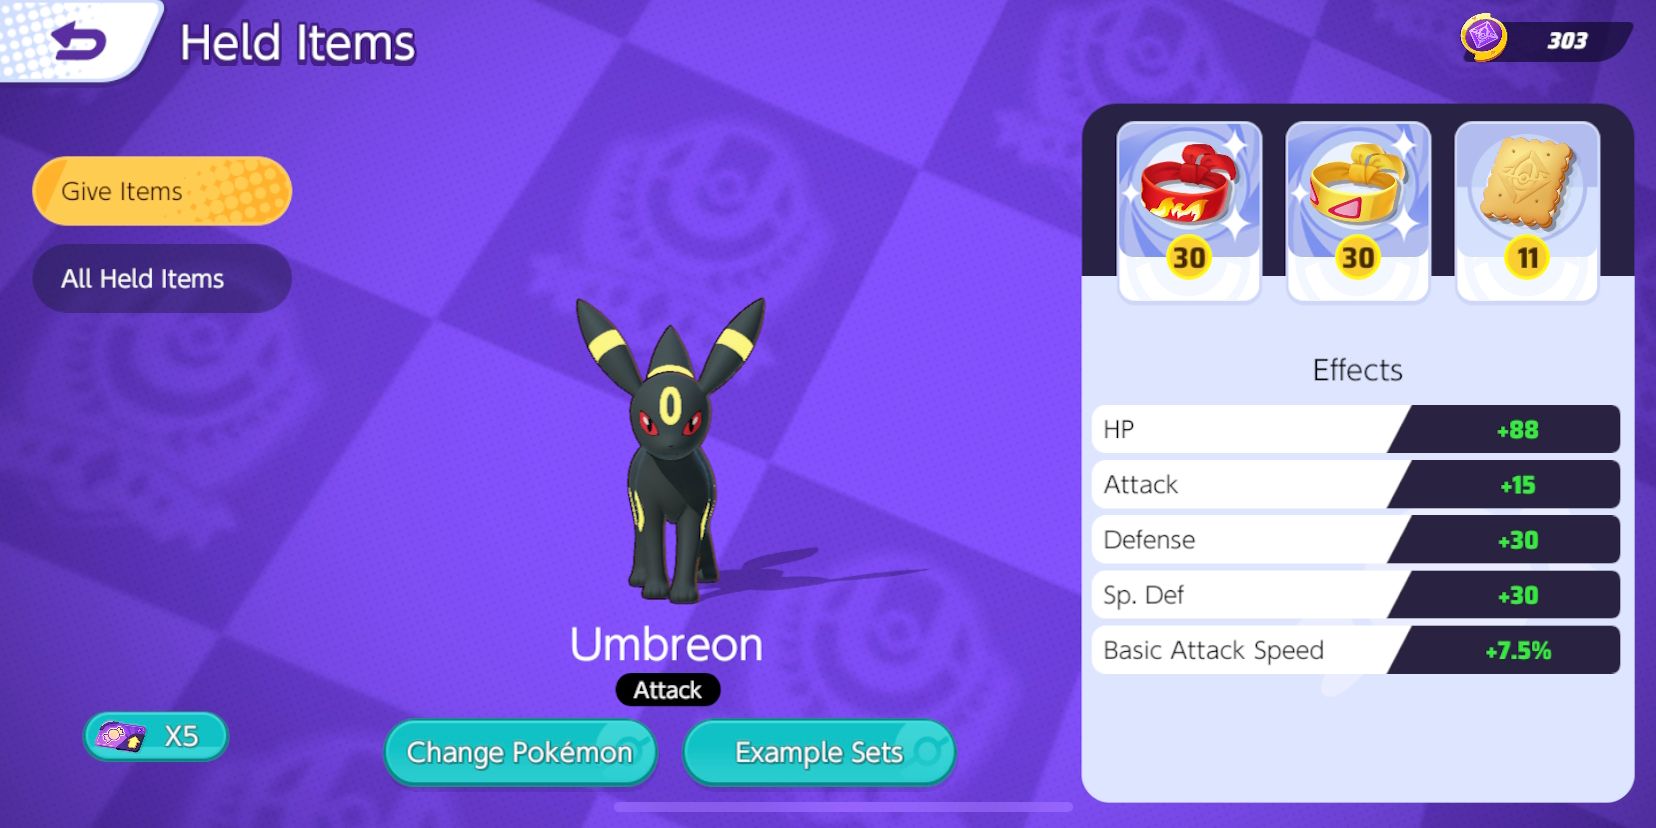 Umbreon Held Item selection screen with Muscle Band, Focus Band, and Aeos Cookie selected